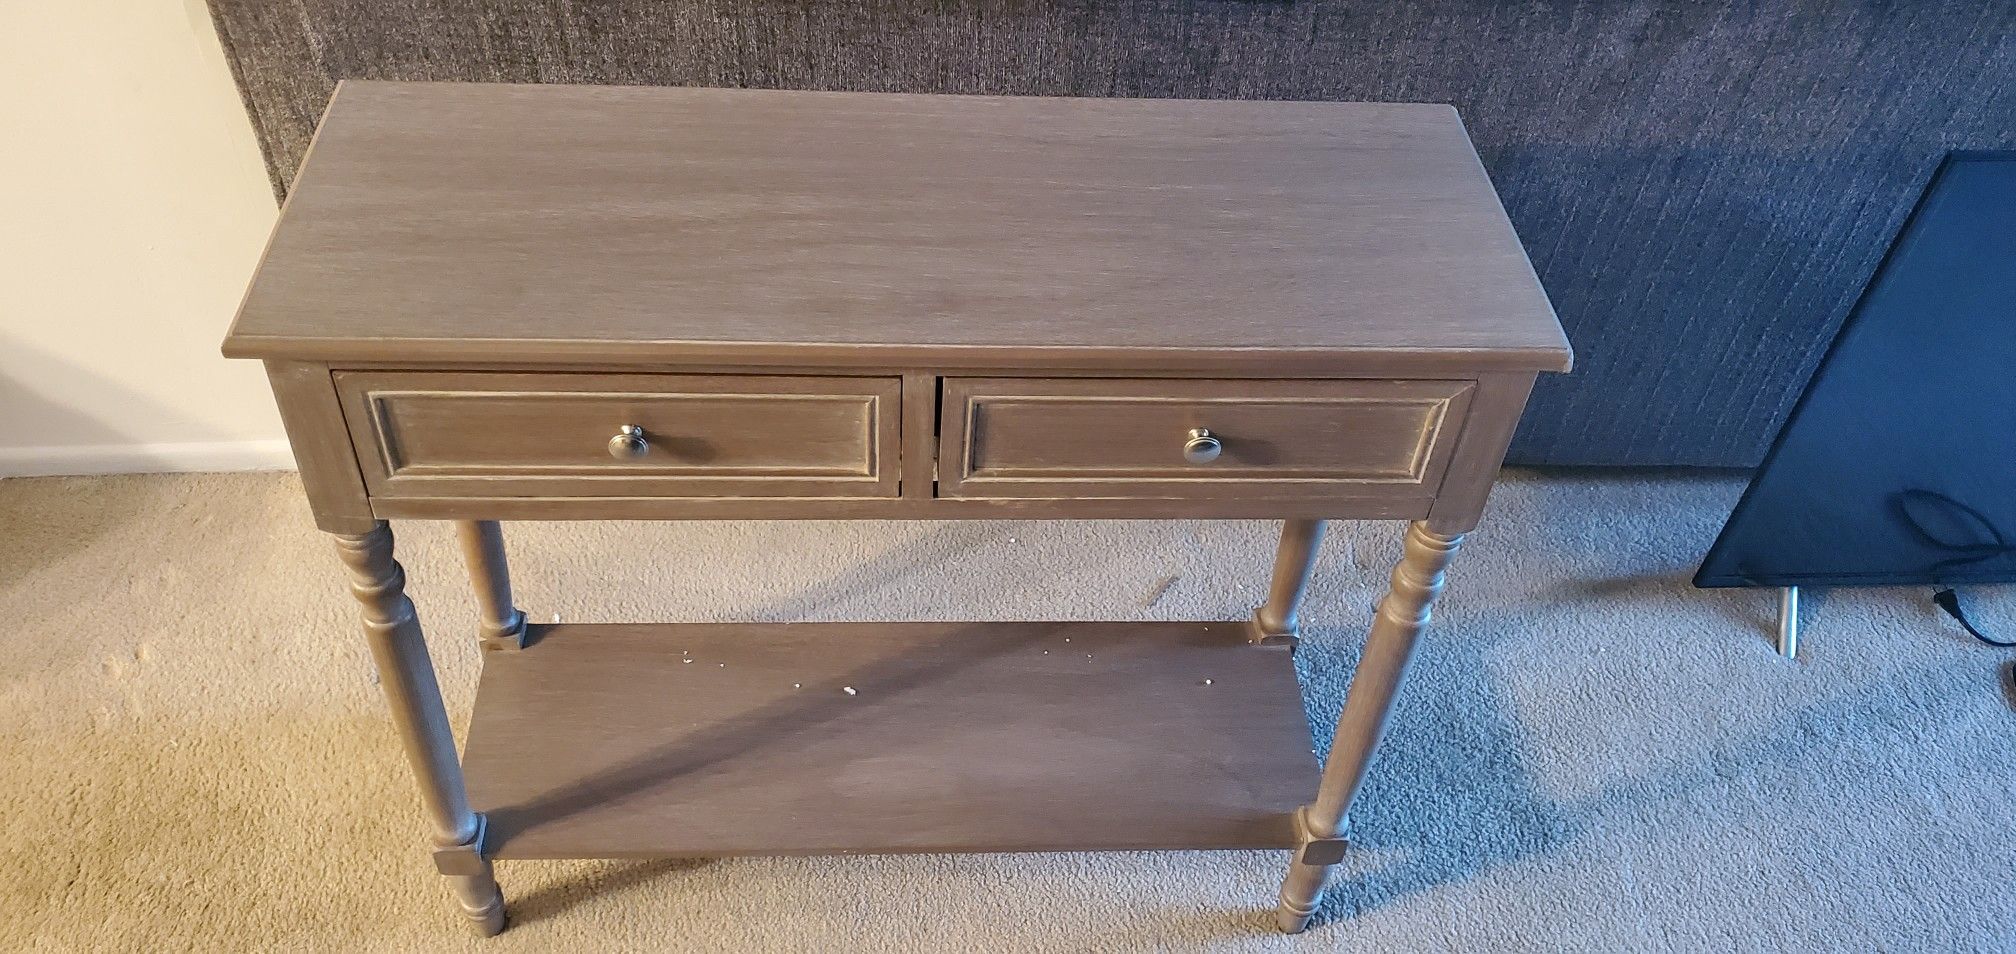 End table 35.5" wide x 32" high x 13" deep